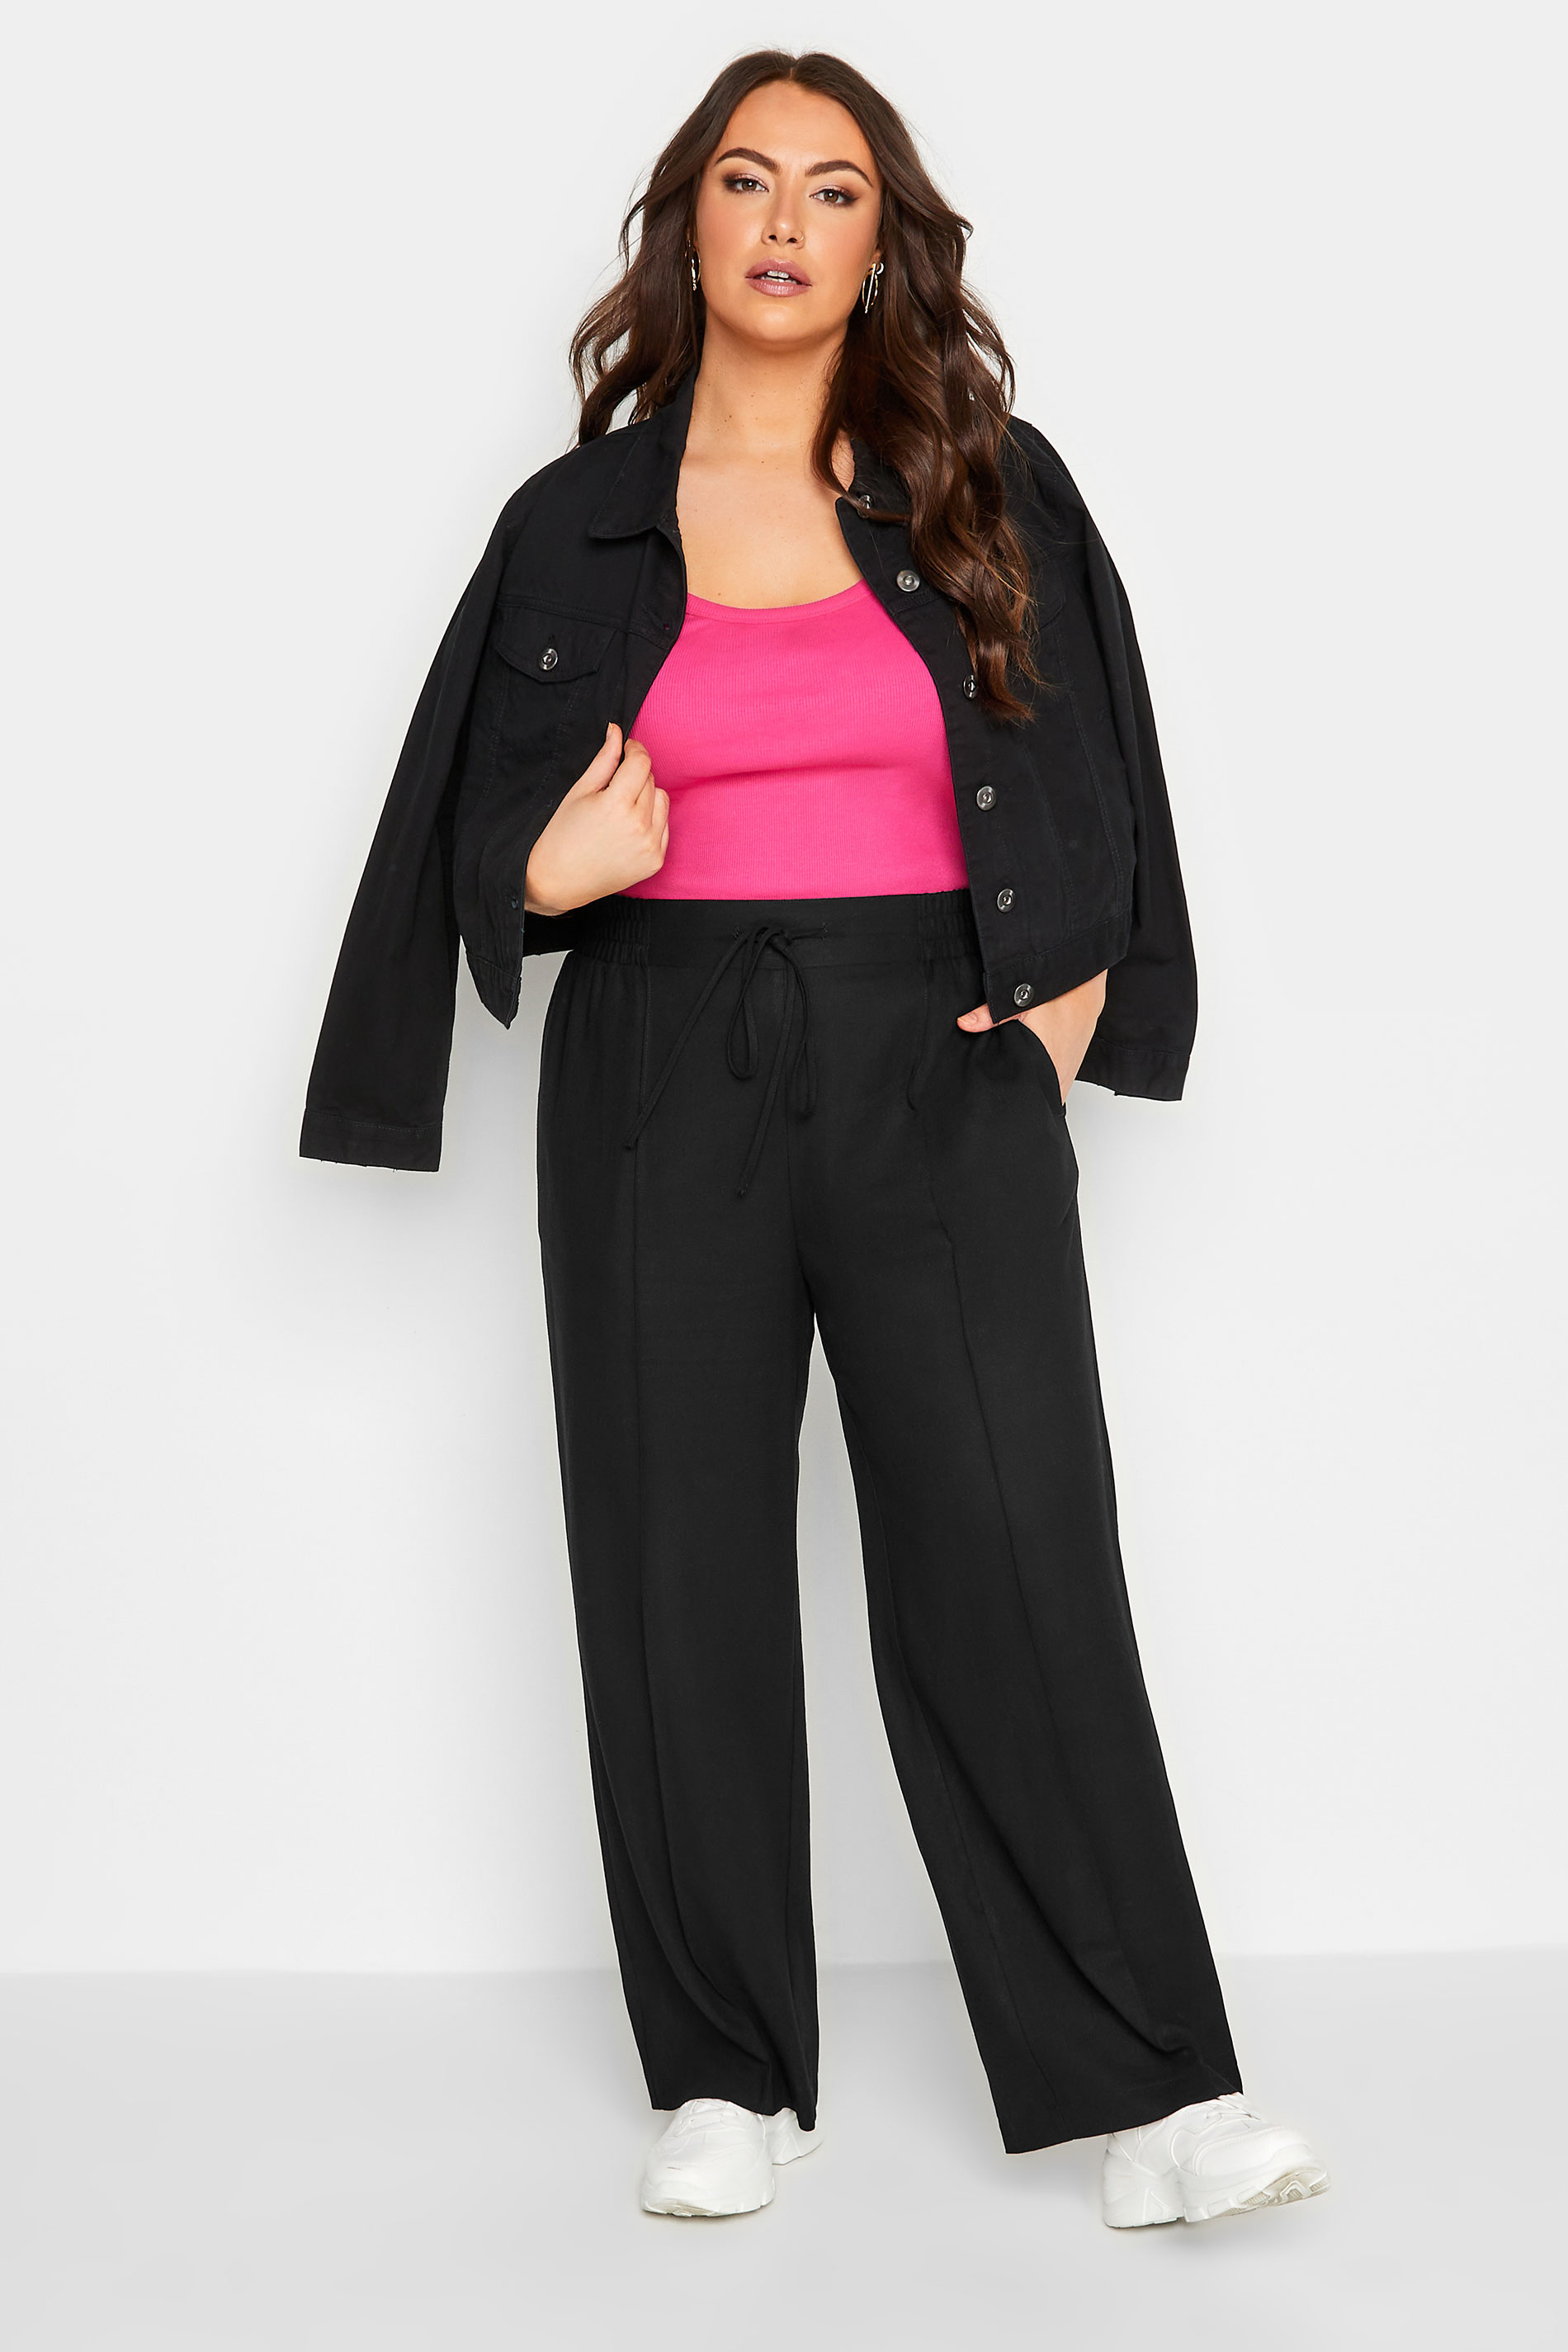 Tilbagebetale samarbejde Rouse YOURS Curve Plus Size Black Wide Leg Linen Look Trousers | Yours Clothing